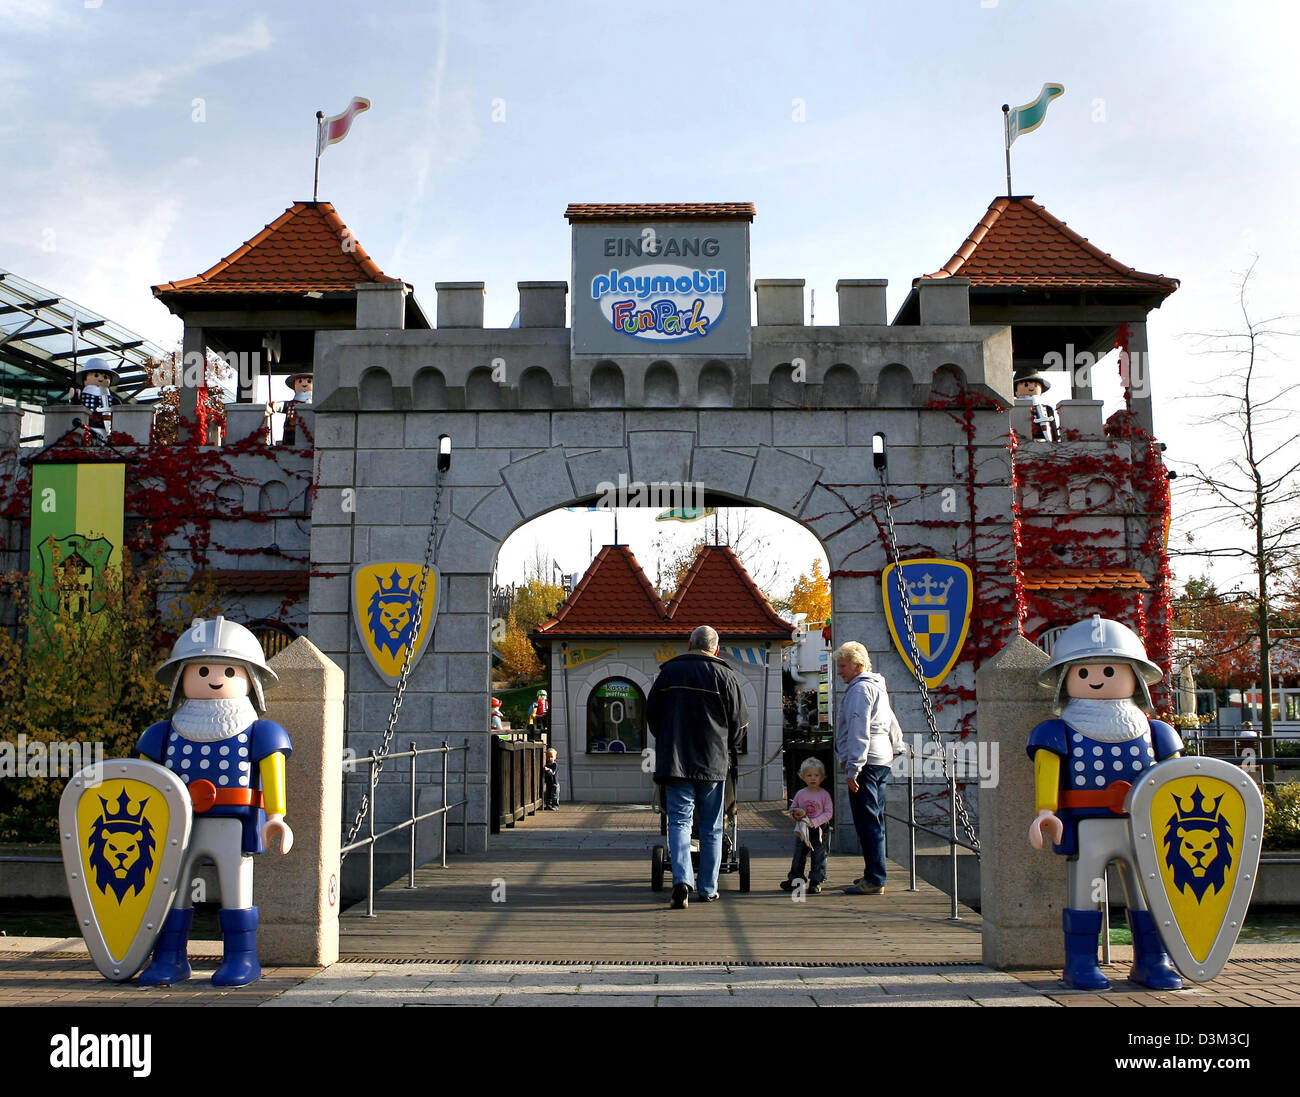 dpa) - Two overdimensional Playmobil knight figures stand at the entrance of the Playmobil-FunPark in near Nuremberg, Germany, 27 October 2005. Photo: Daniel Karmann Stock Photo - Alamy